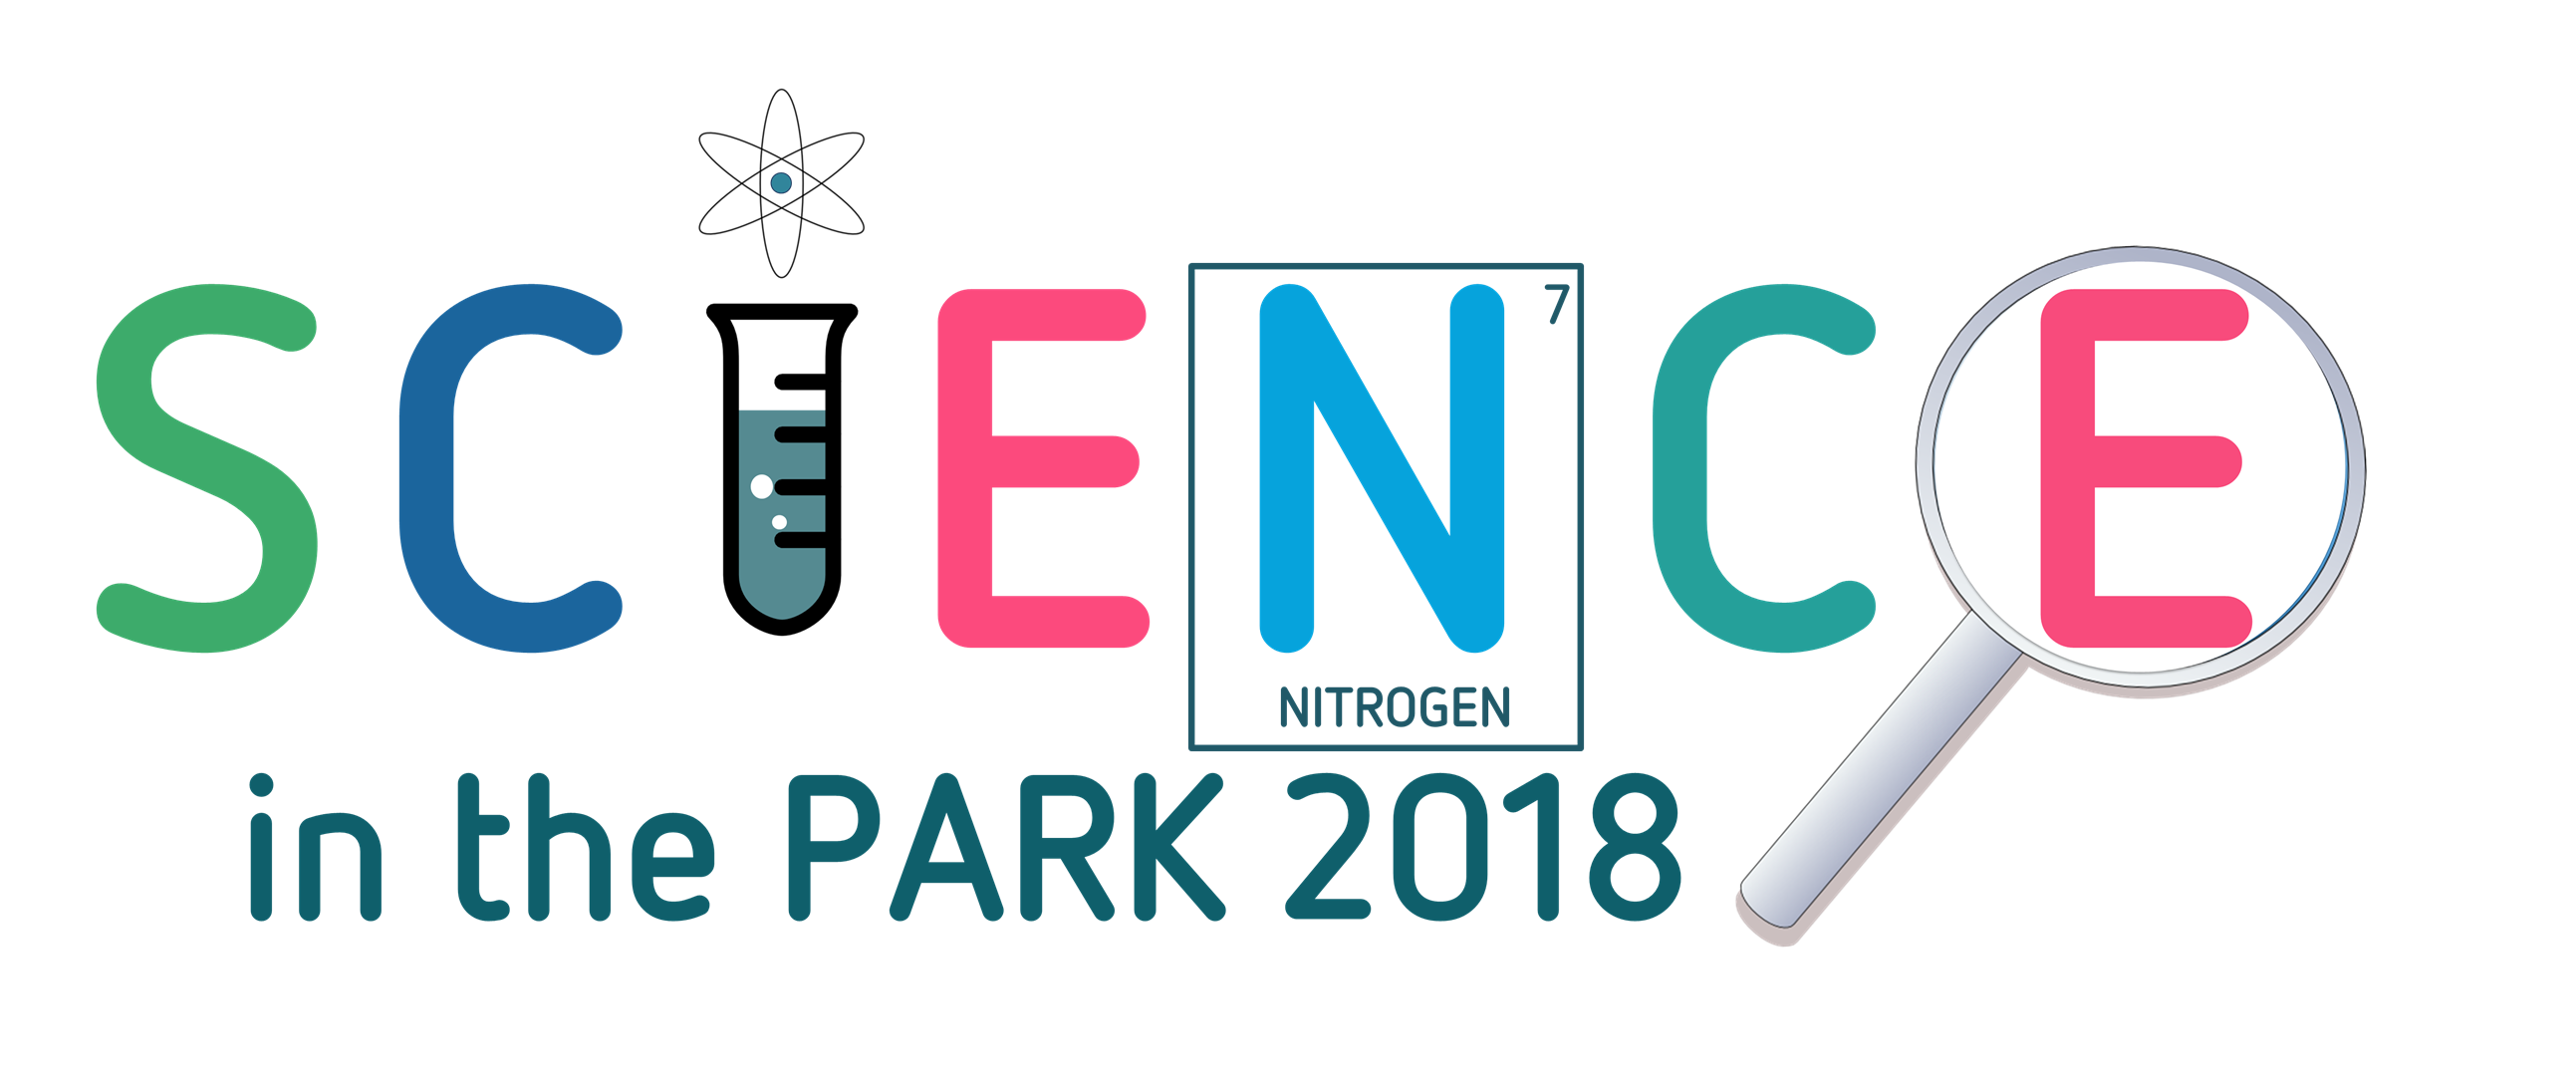 Science in the Park 2018 - Nottinghamshire British Science Association